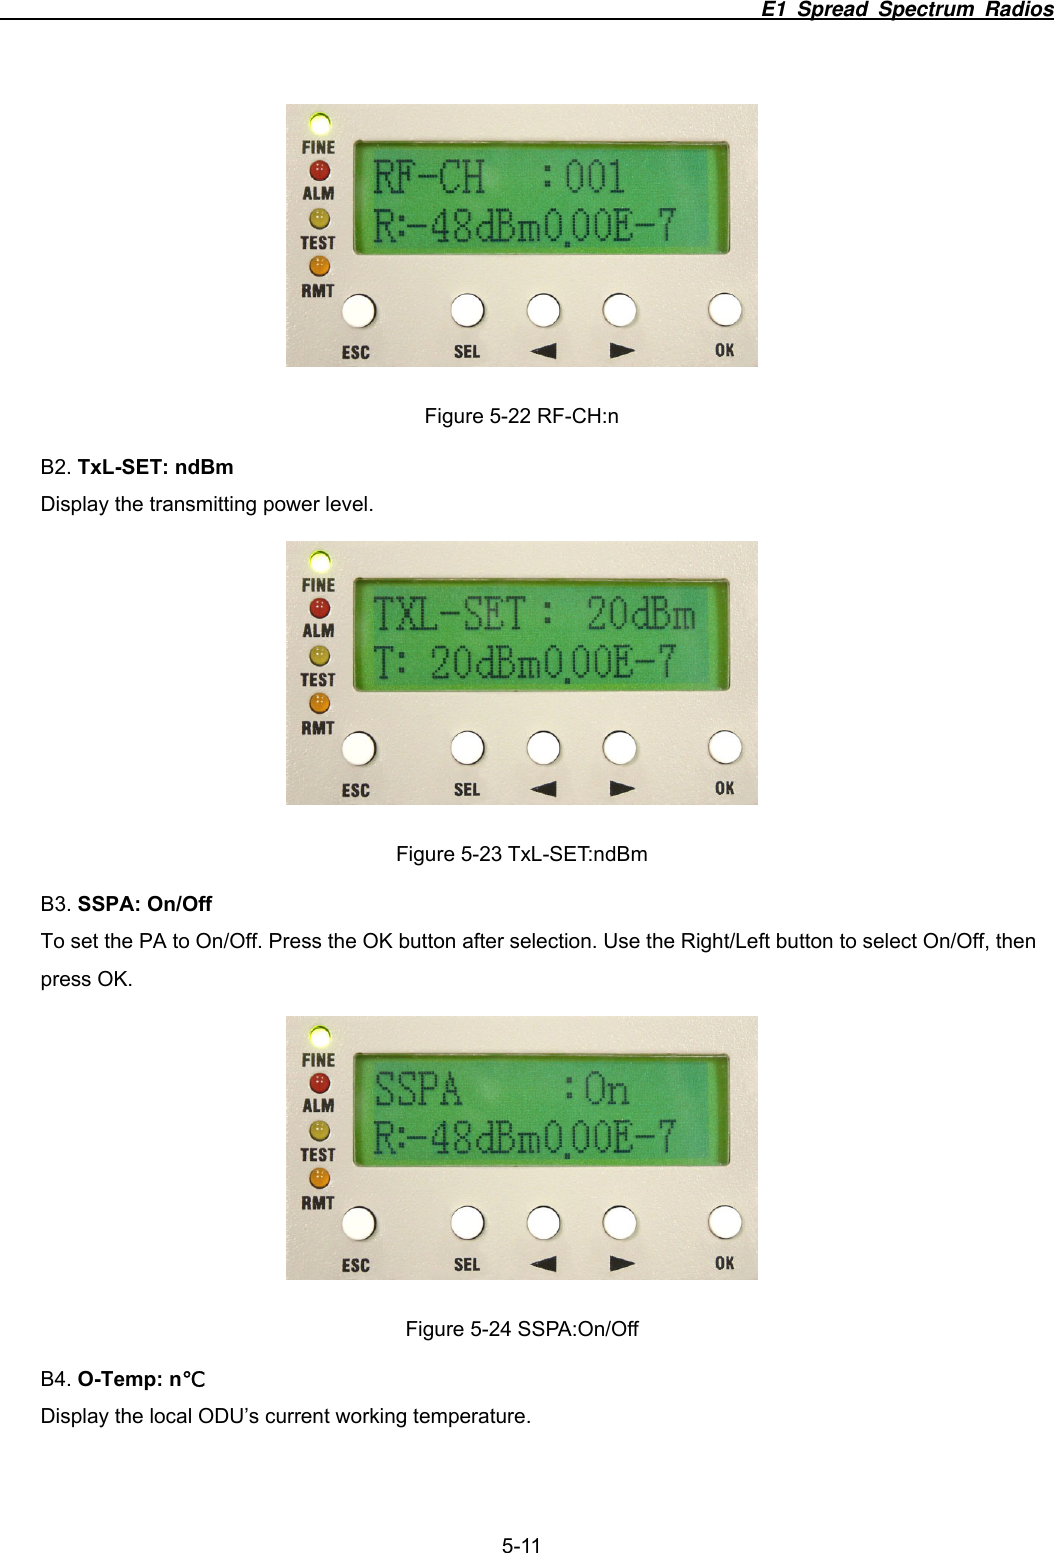                                                                          E1 Spread Spectrum Radios              5-11  Figure 5-22 RF-CH:n B2. TxL-SET: ndBm Display the transmitting power level.  Figure 5-23 TxL-SET:ndBm B3. SSPA: On/Off To set the PA to On/Off. Press the OK button after selection. Use the Right/Left button to select On/Off, then press OK.  Figure 5-24 SSPA:On/Off B4. O-Temp: n℃ Display the local ODU’s current working temperature. 